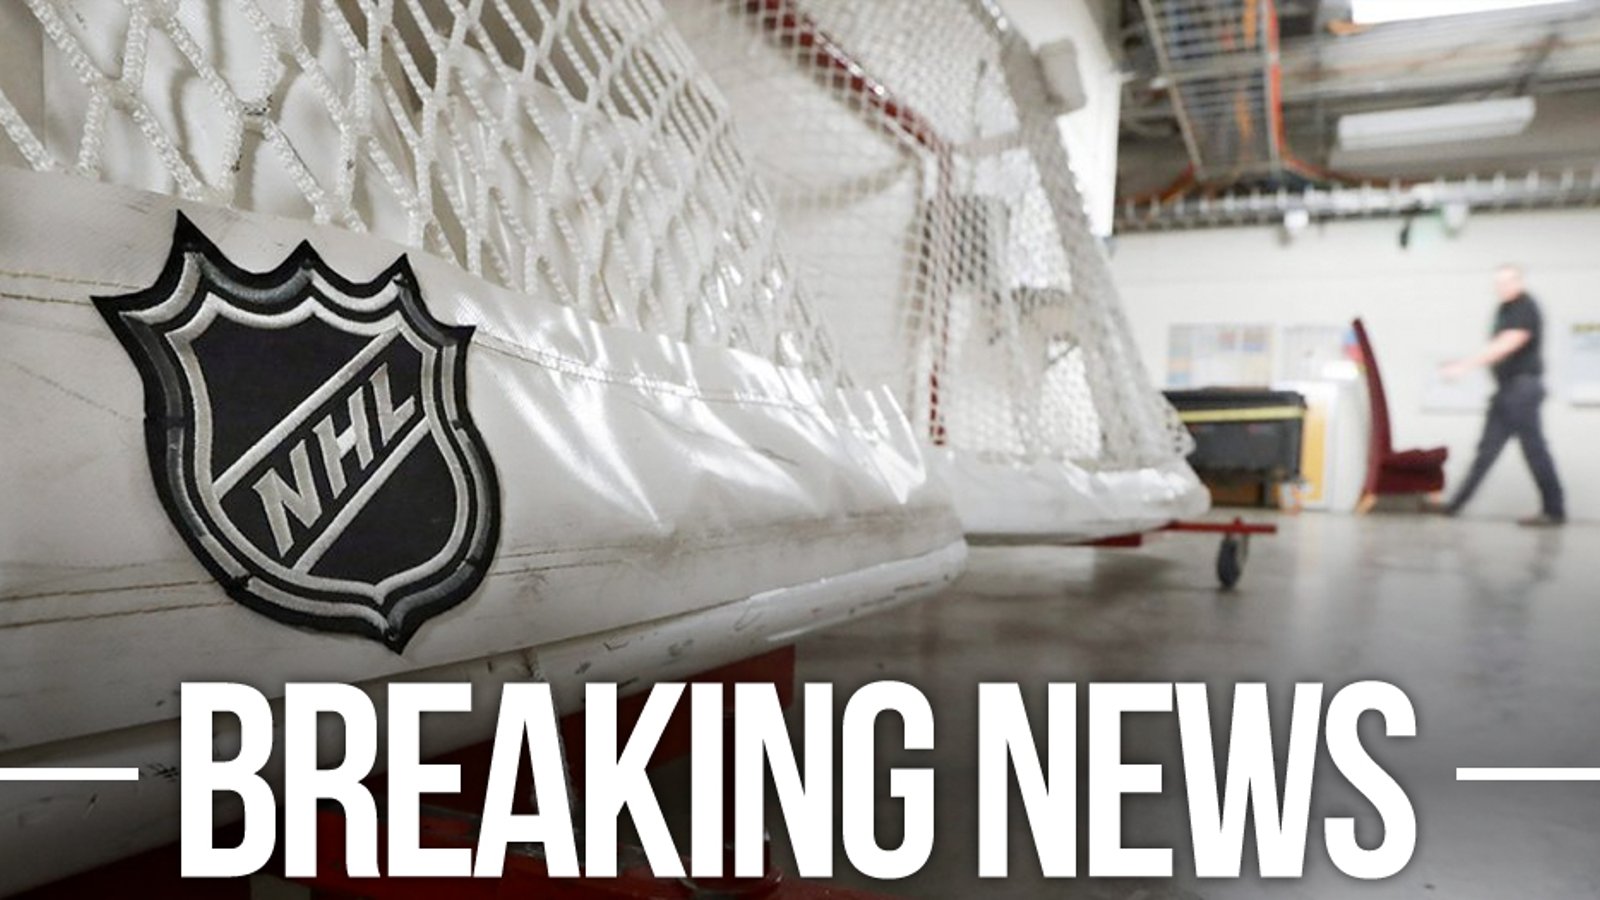 NHL shuts down yet another team